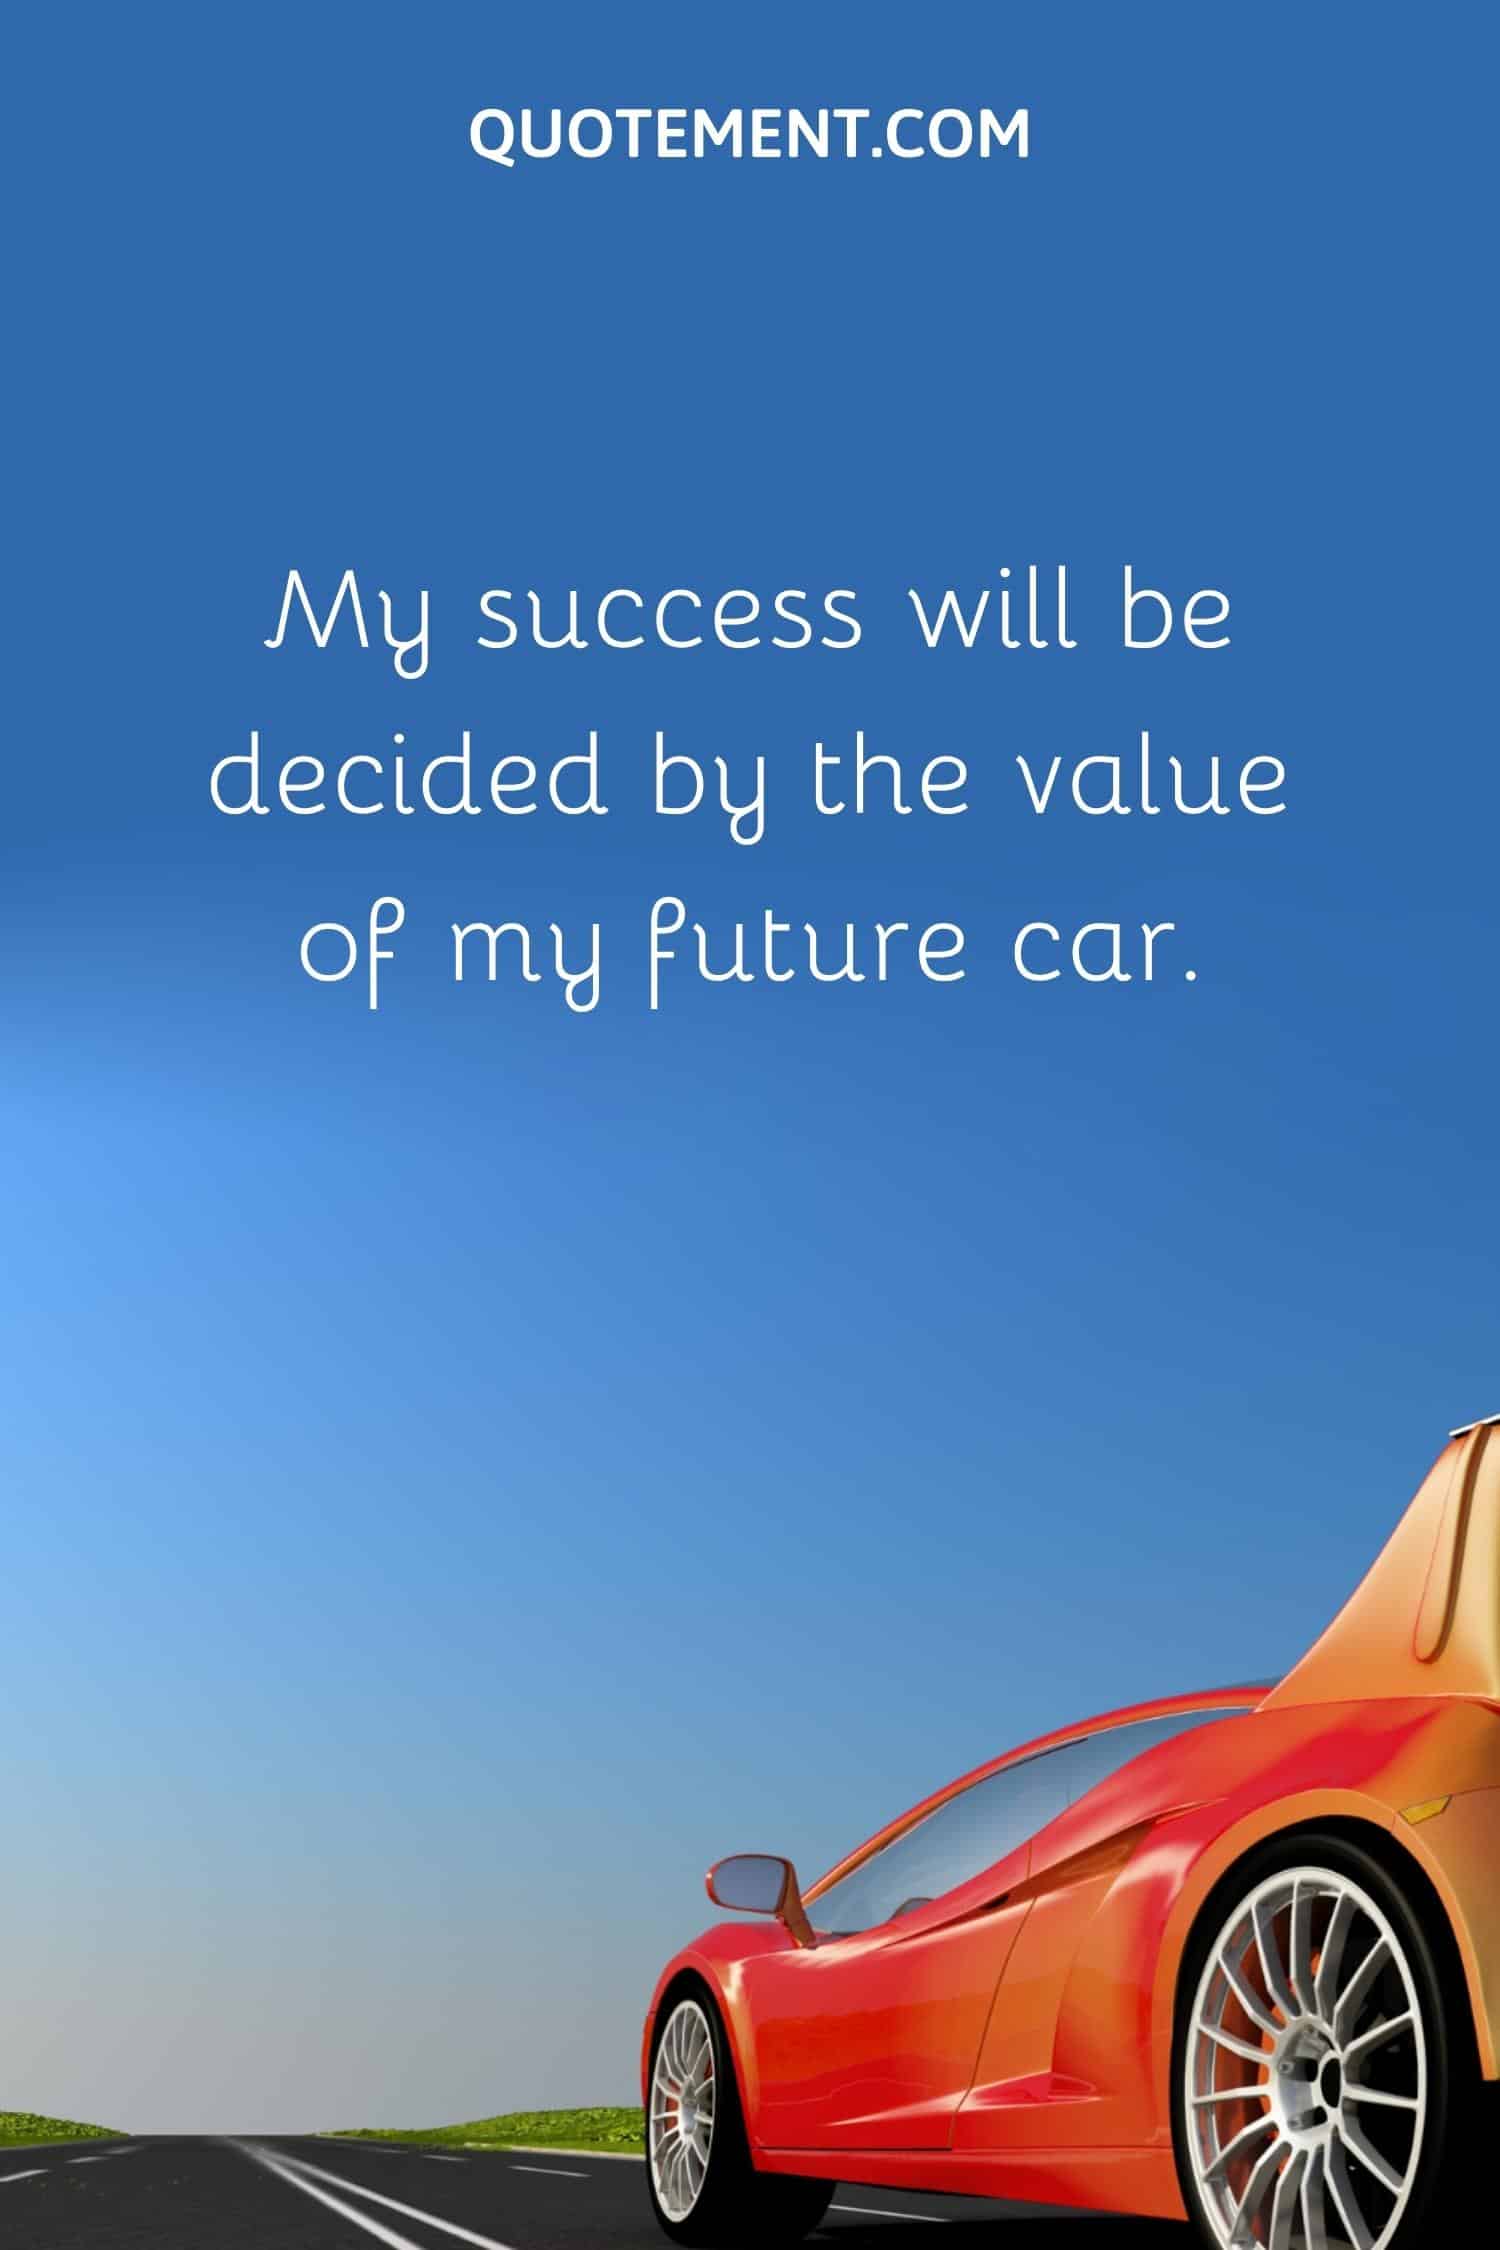 My success will be decided by the value of my future car